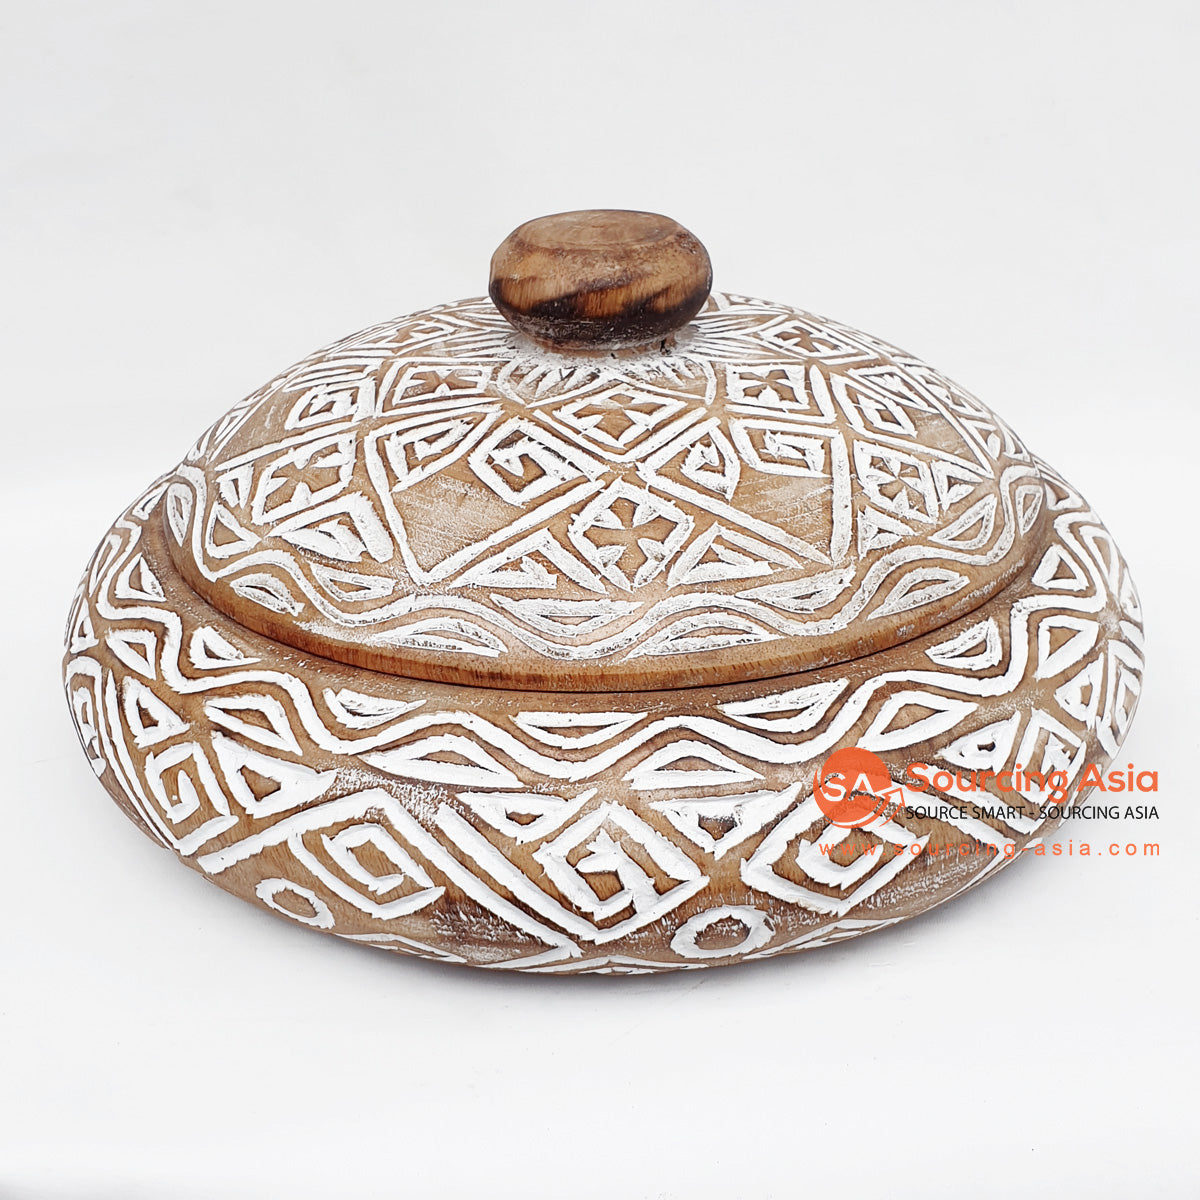 DGPC010 NATURAL SUAR WOOD TRIBAL CARVED ROUND BOWL WITH LID